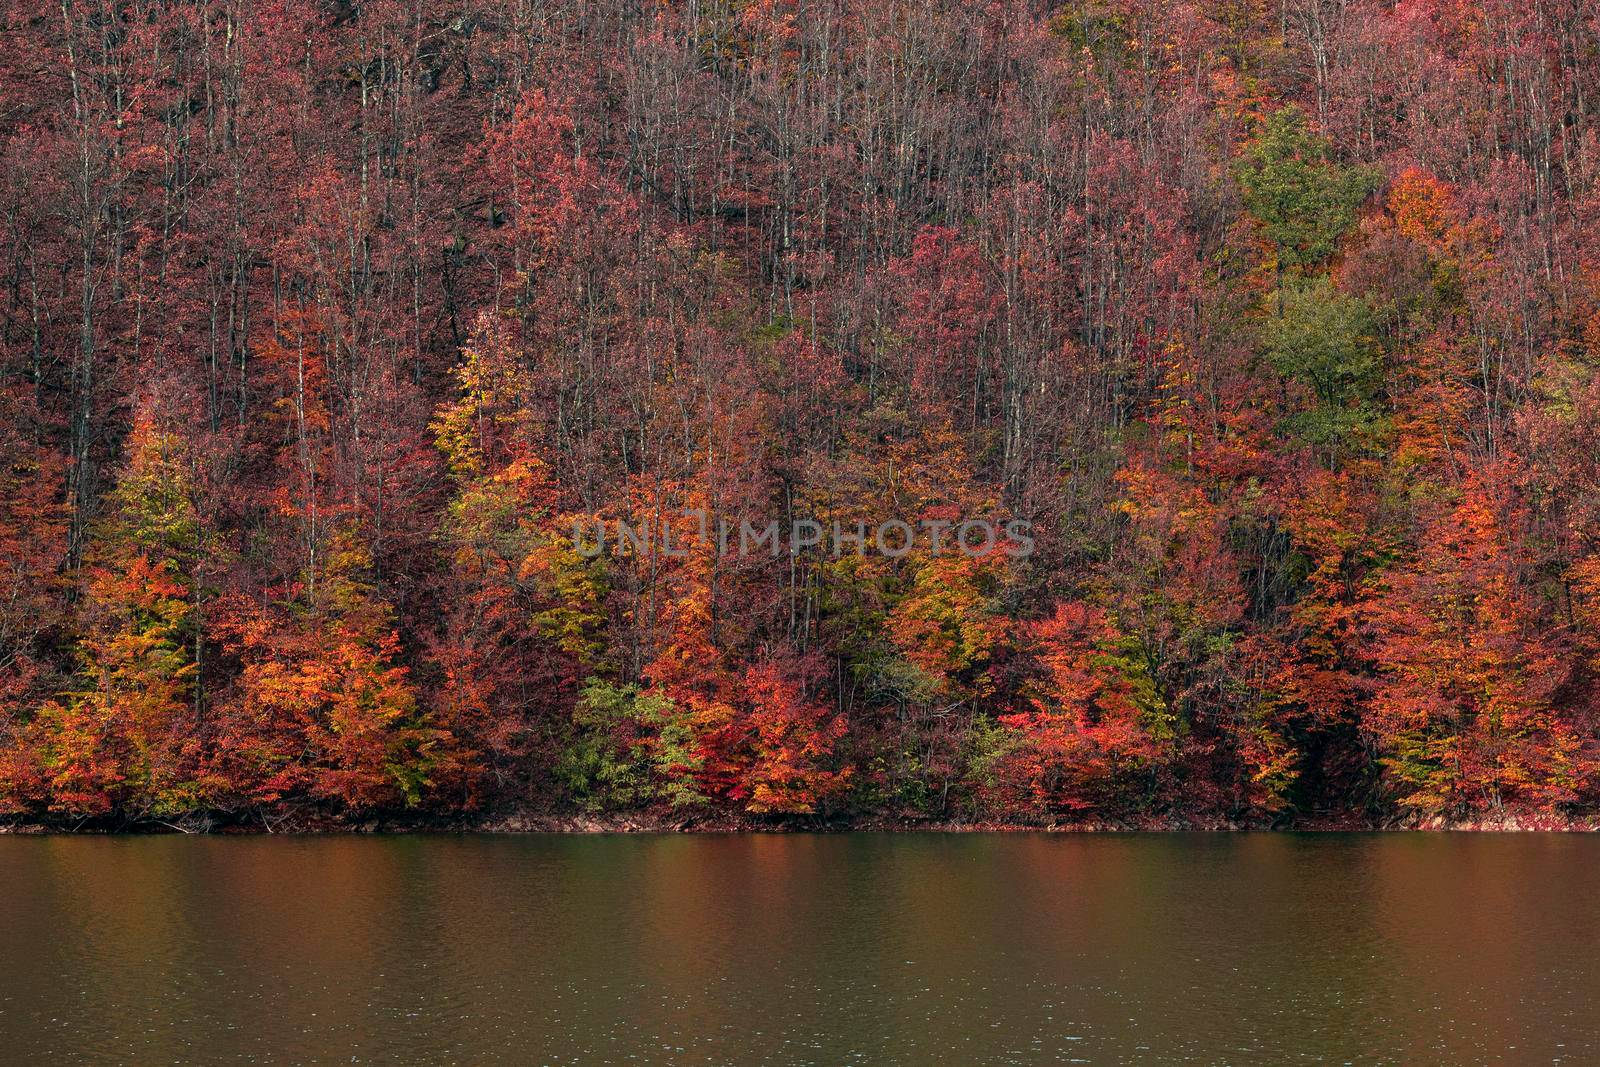 A forest with strong autumn colors near a lake